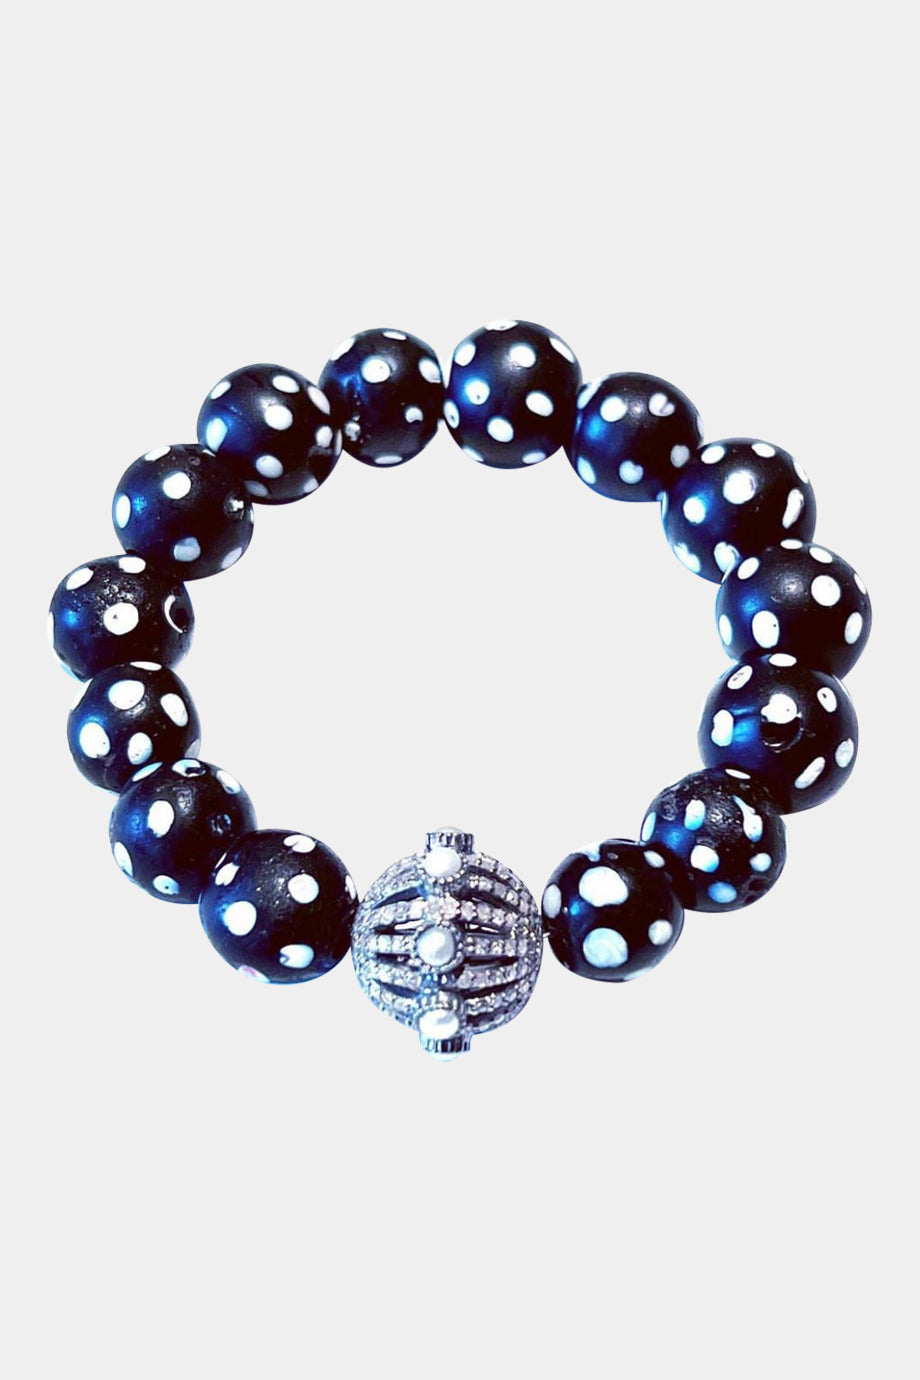 Chevron Bracelet with Large Dome Ball